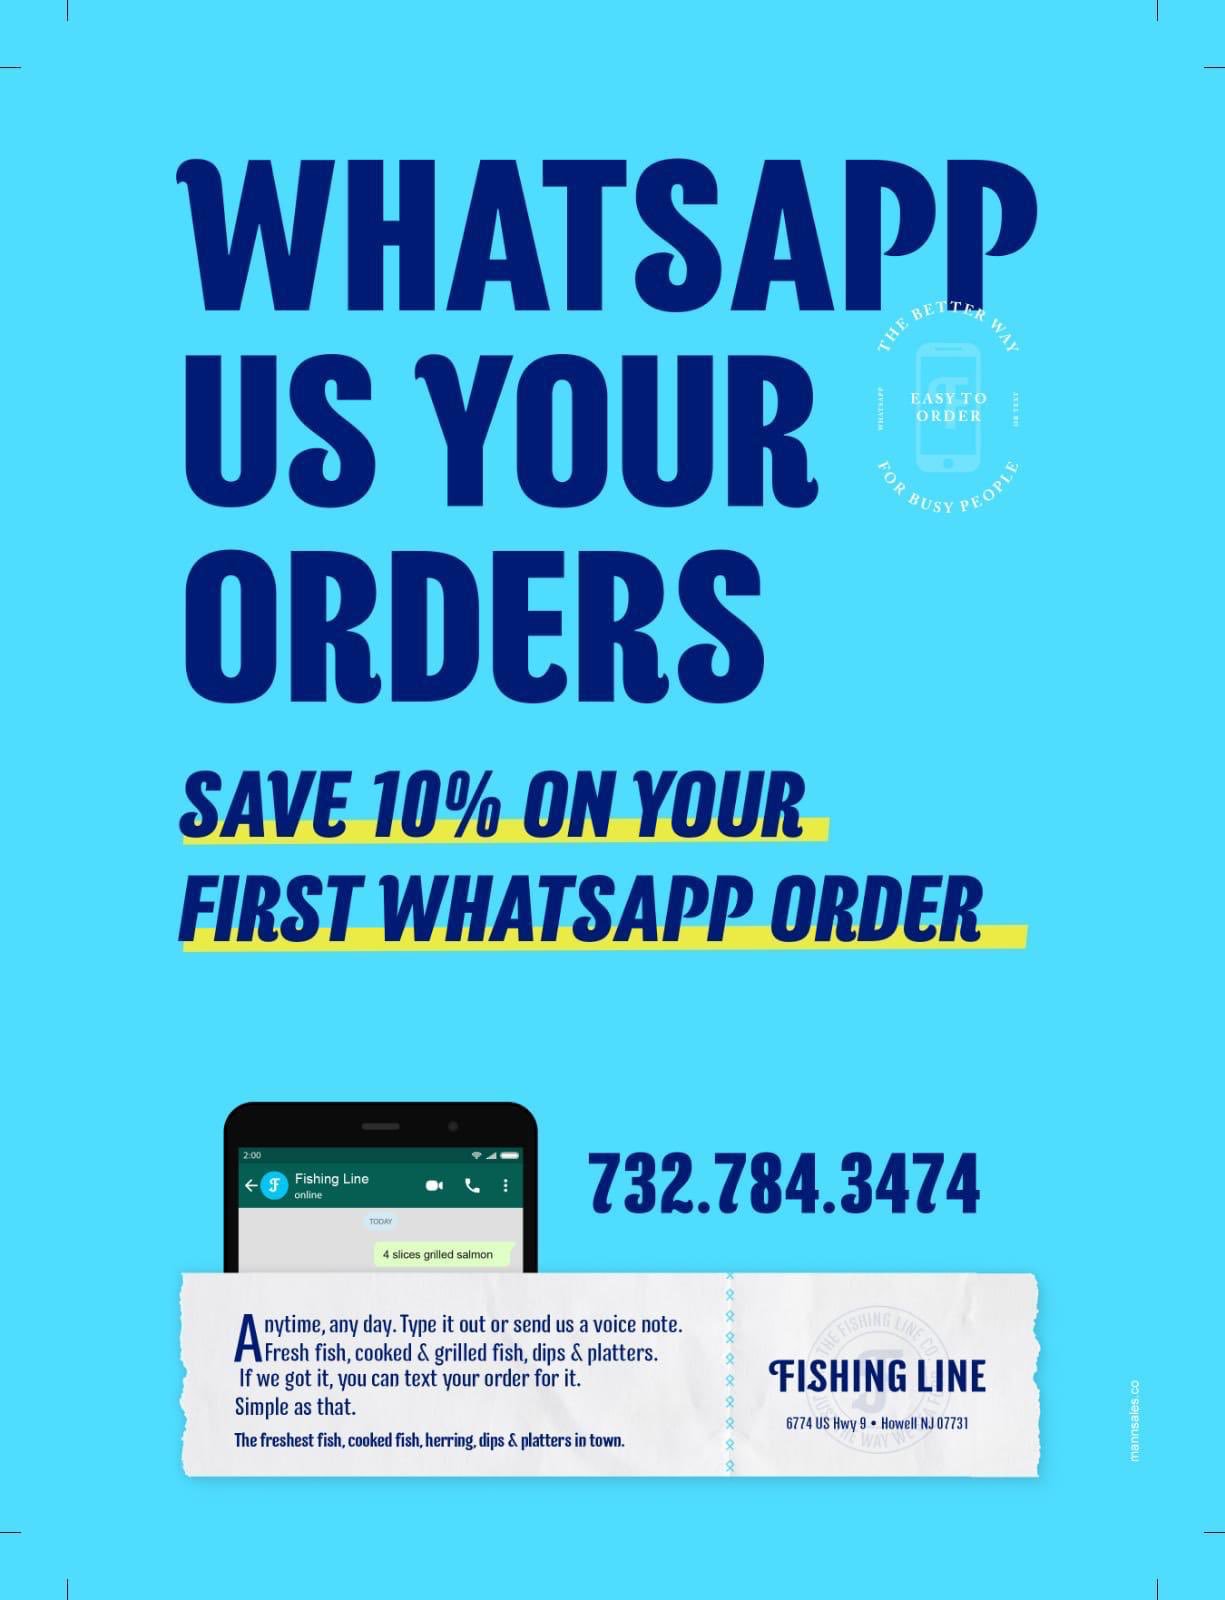 The Lakewood Scoop on X: Ad: A new easy way to place your orders at Fishing  Line - get 10% off your first Whatsapp order!  / X